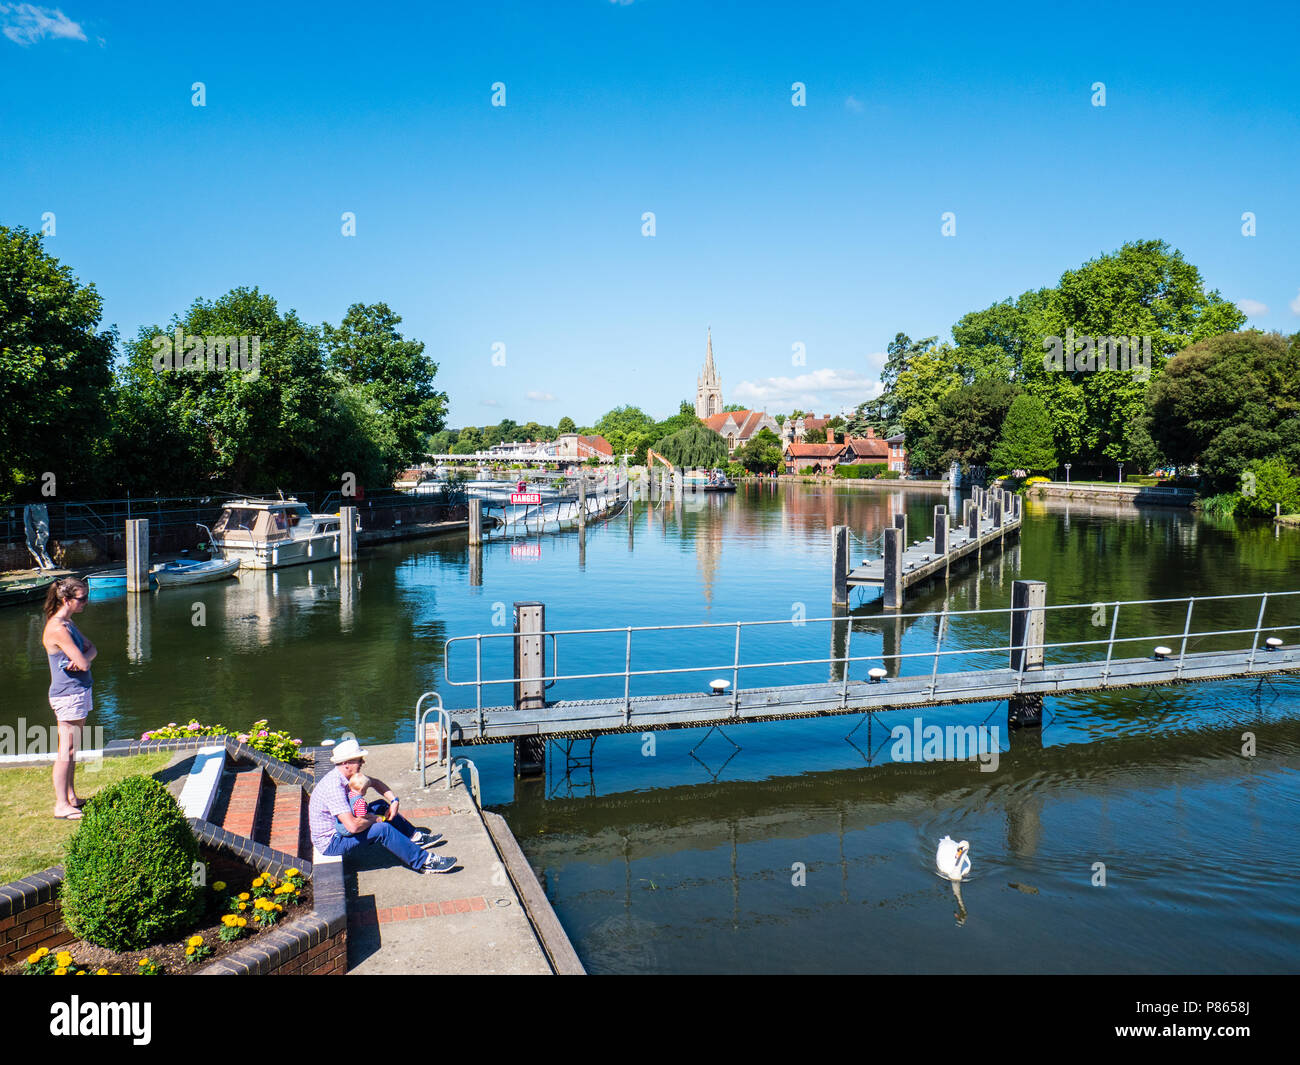 Family, at Marlow Lock, With view towards Marlow, with River Thames, All Saints Church, Jettys, Weir, Marlow, Buckinghamshire, England, UK, GB. Stock Photo